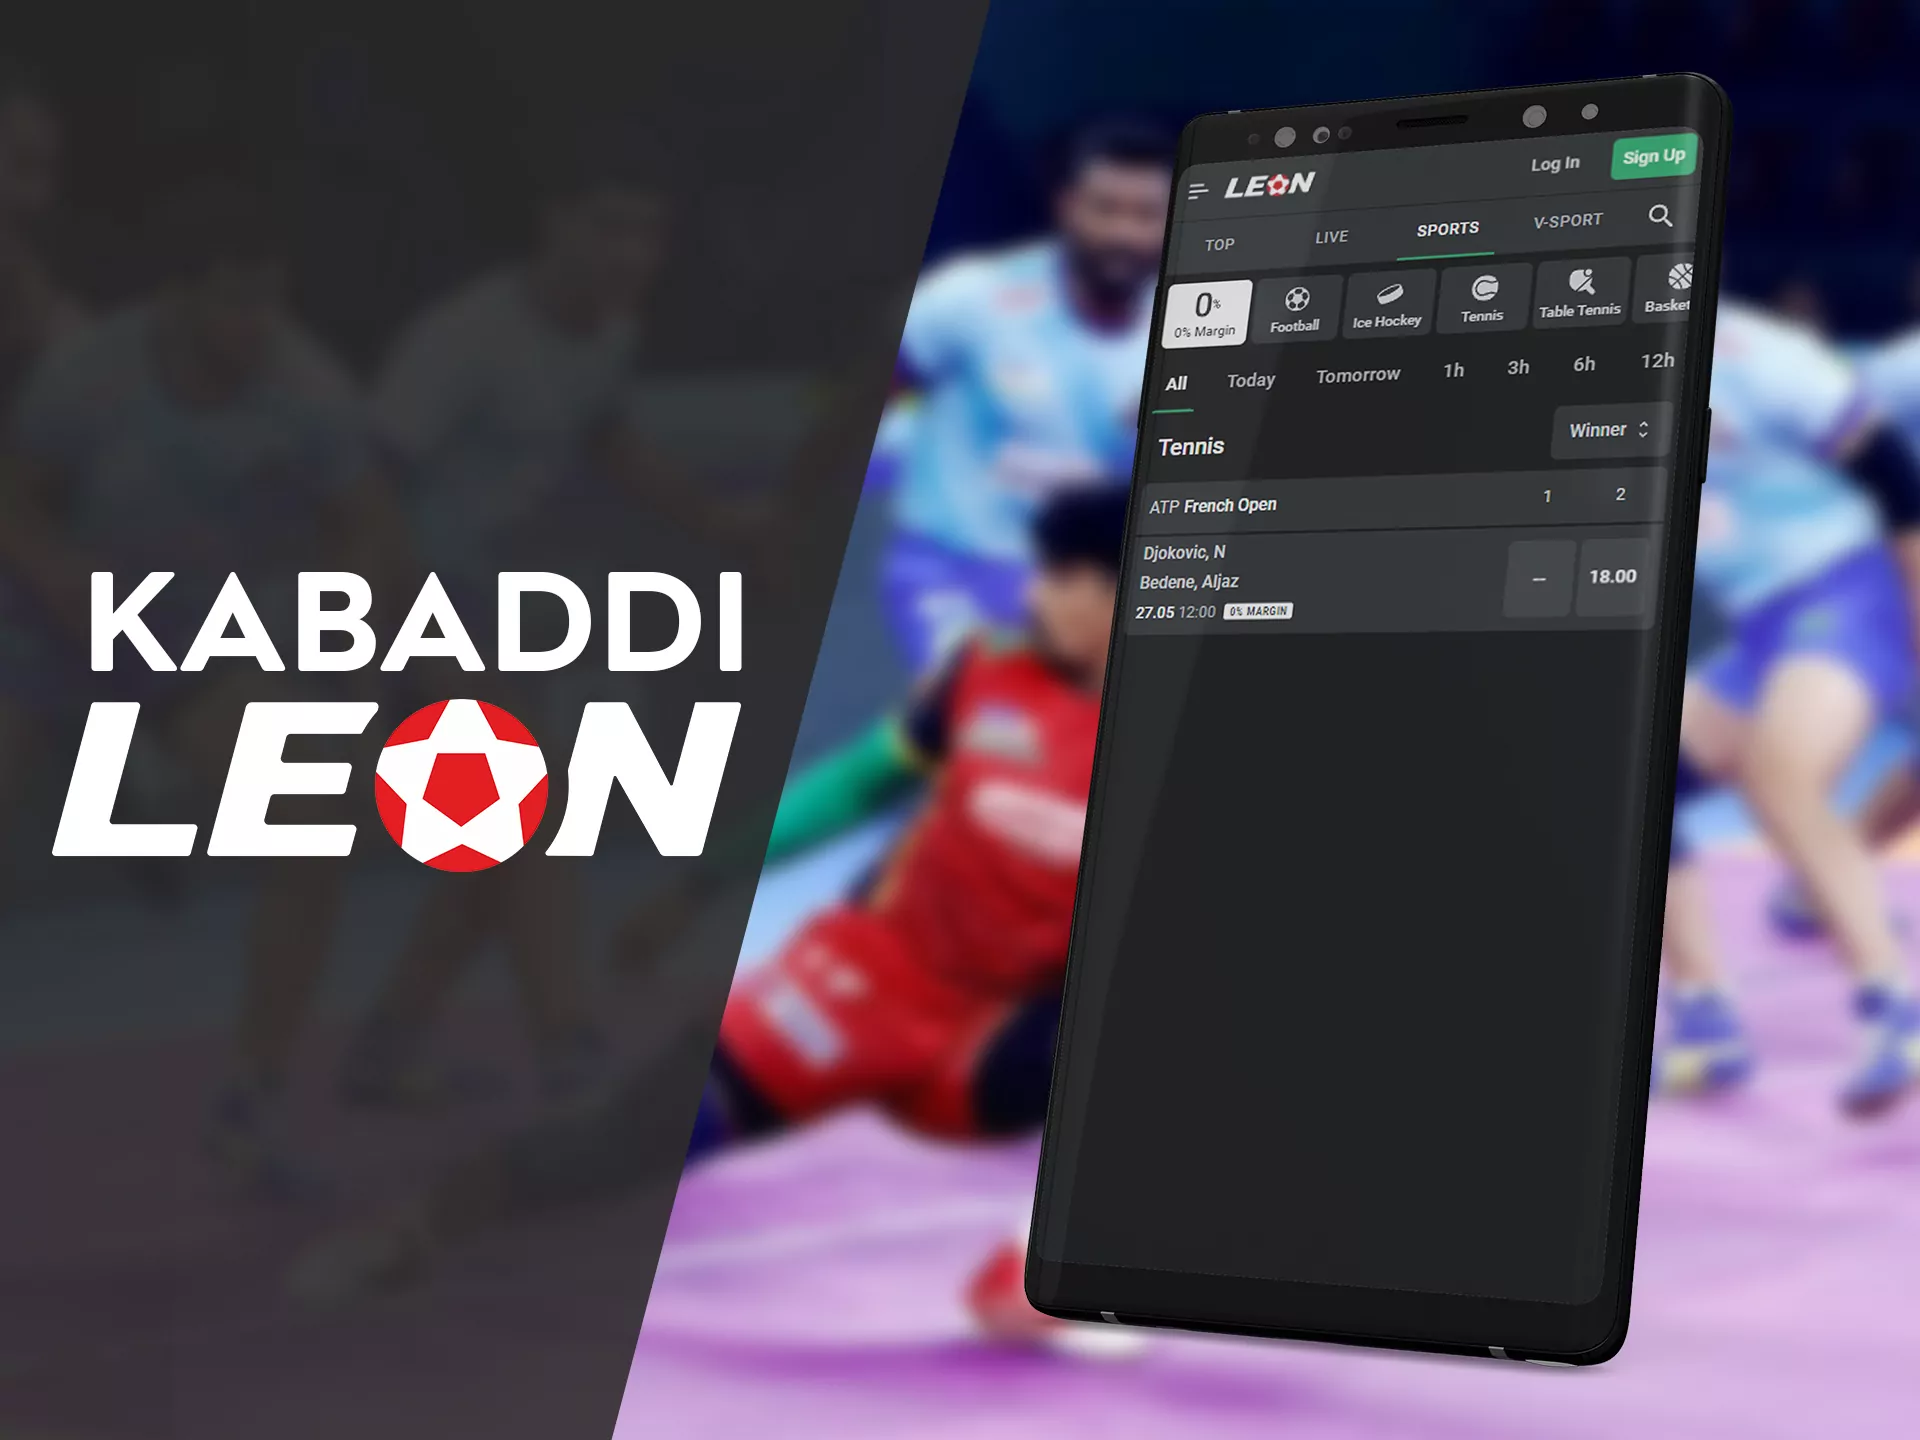 Bet on kabaddi events in the app.